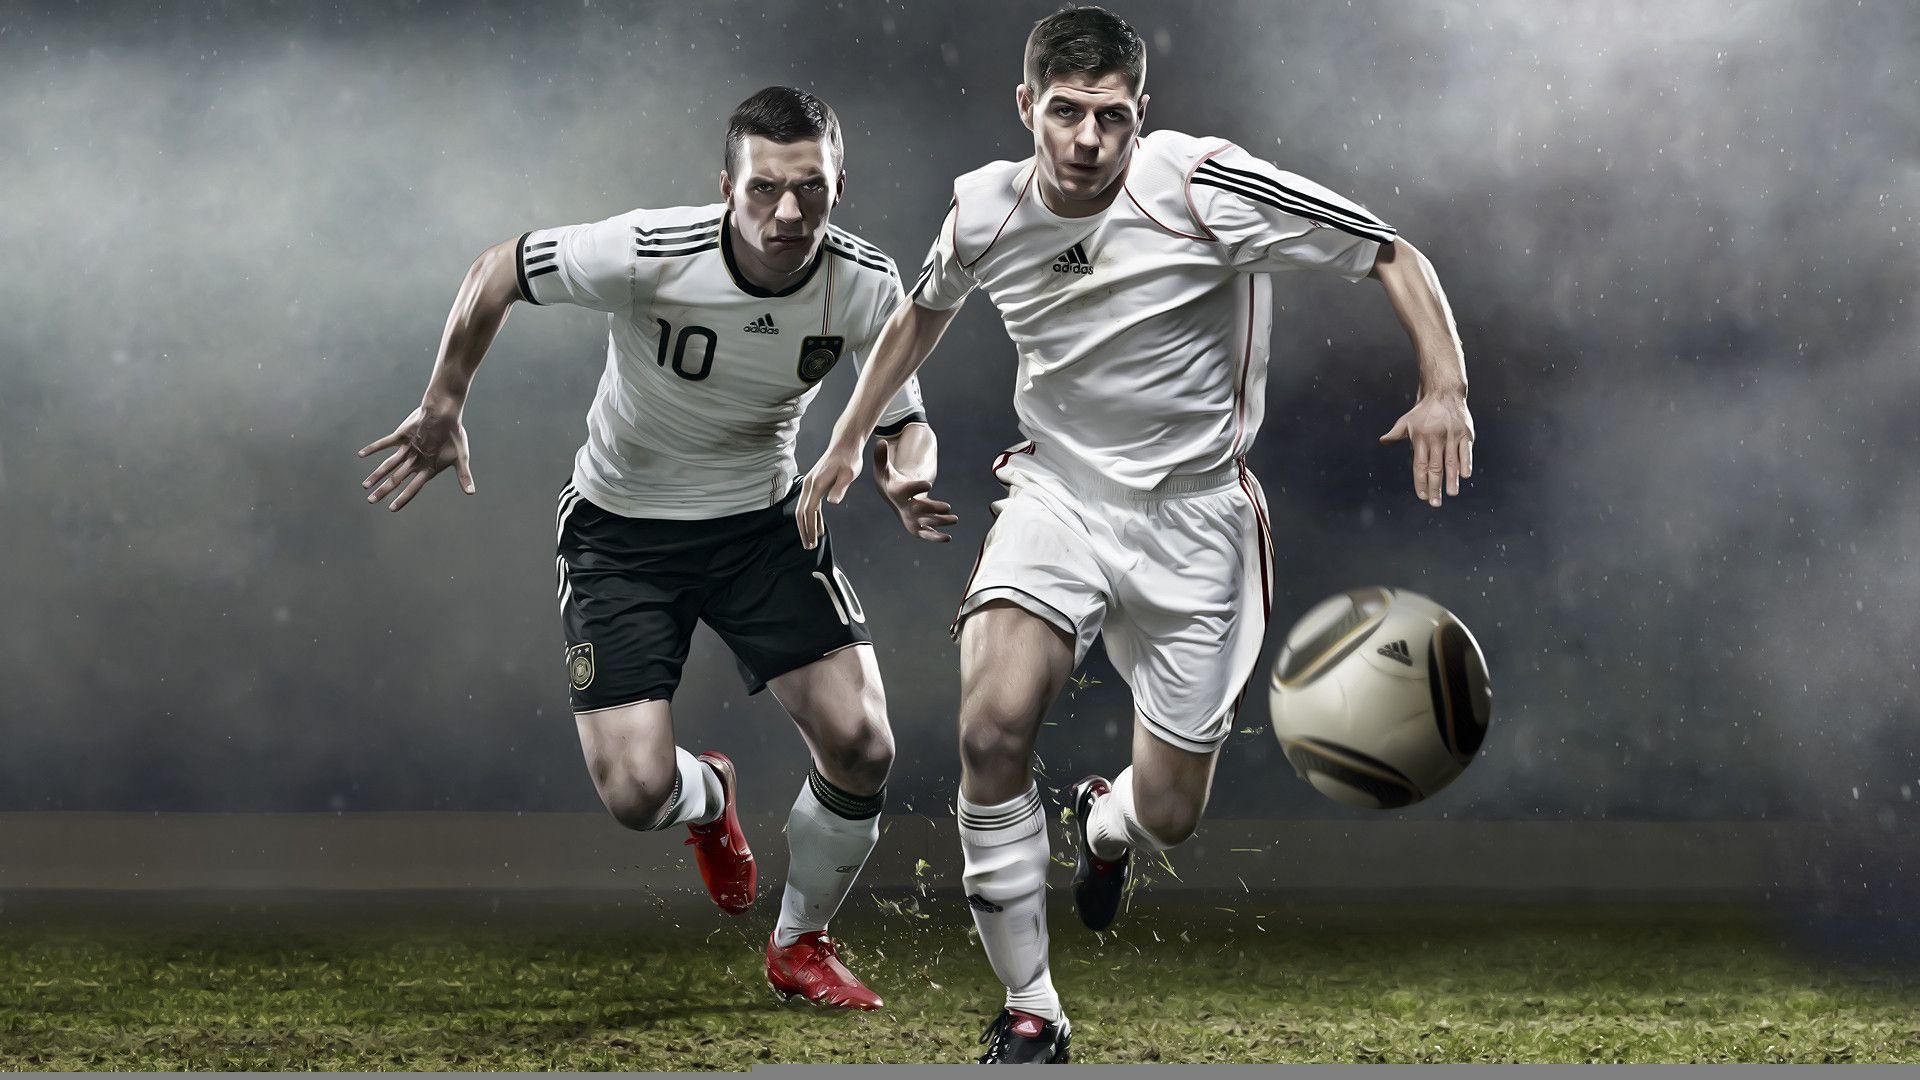 Adidas Soccer Ball Wallpaper Image & Picture